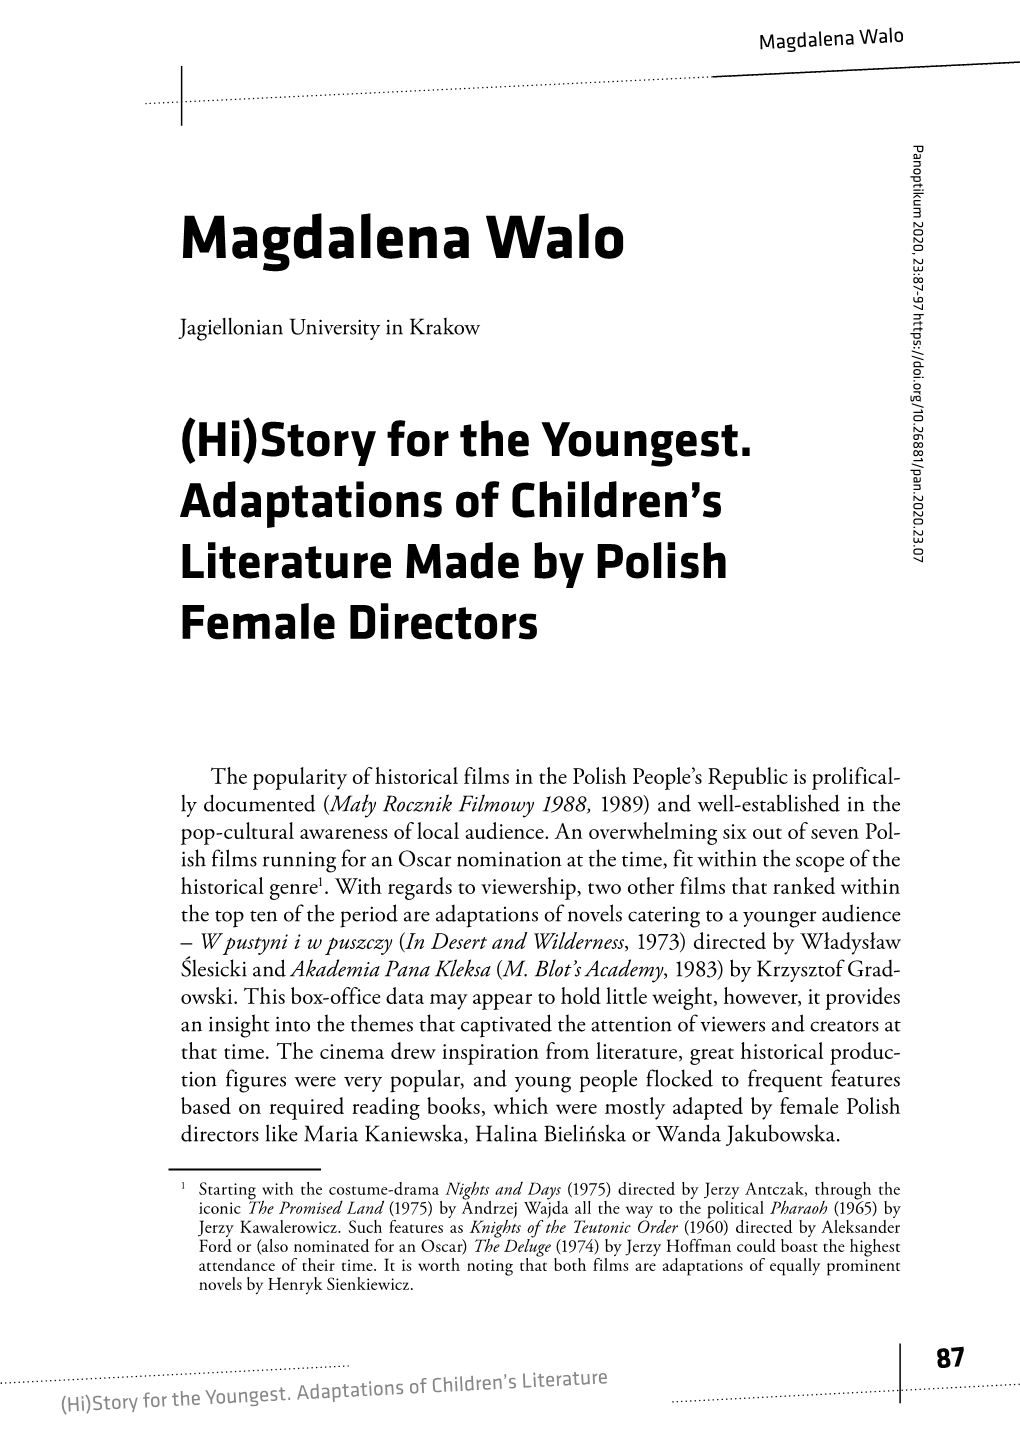 Story for the Youngest. Adaptations of Children's Literature Made by Polish